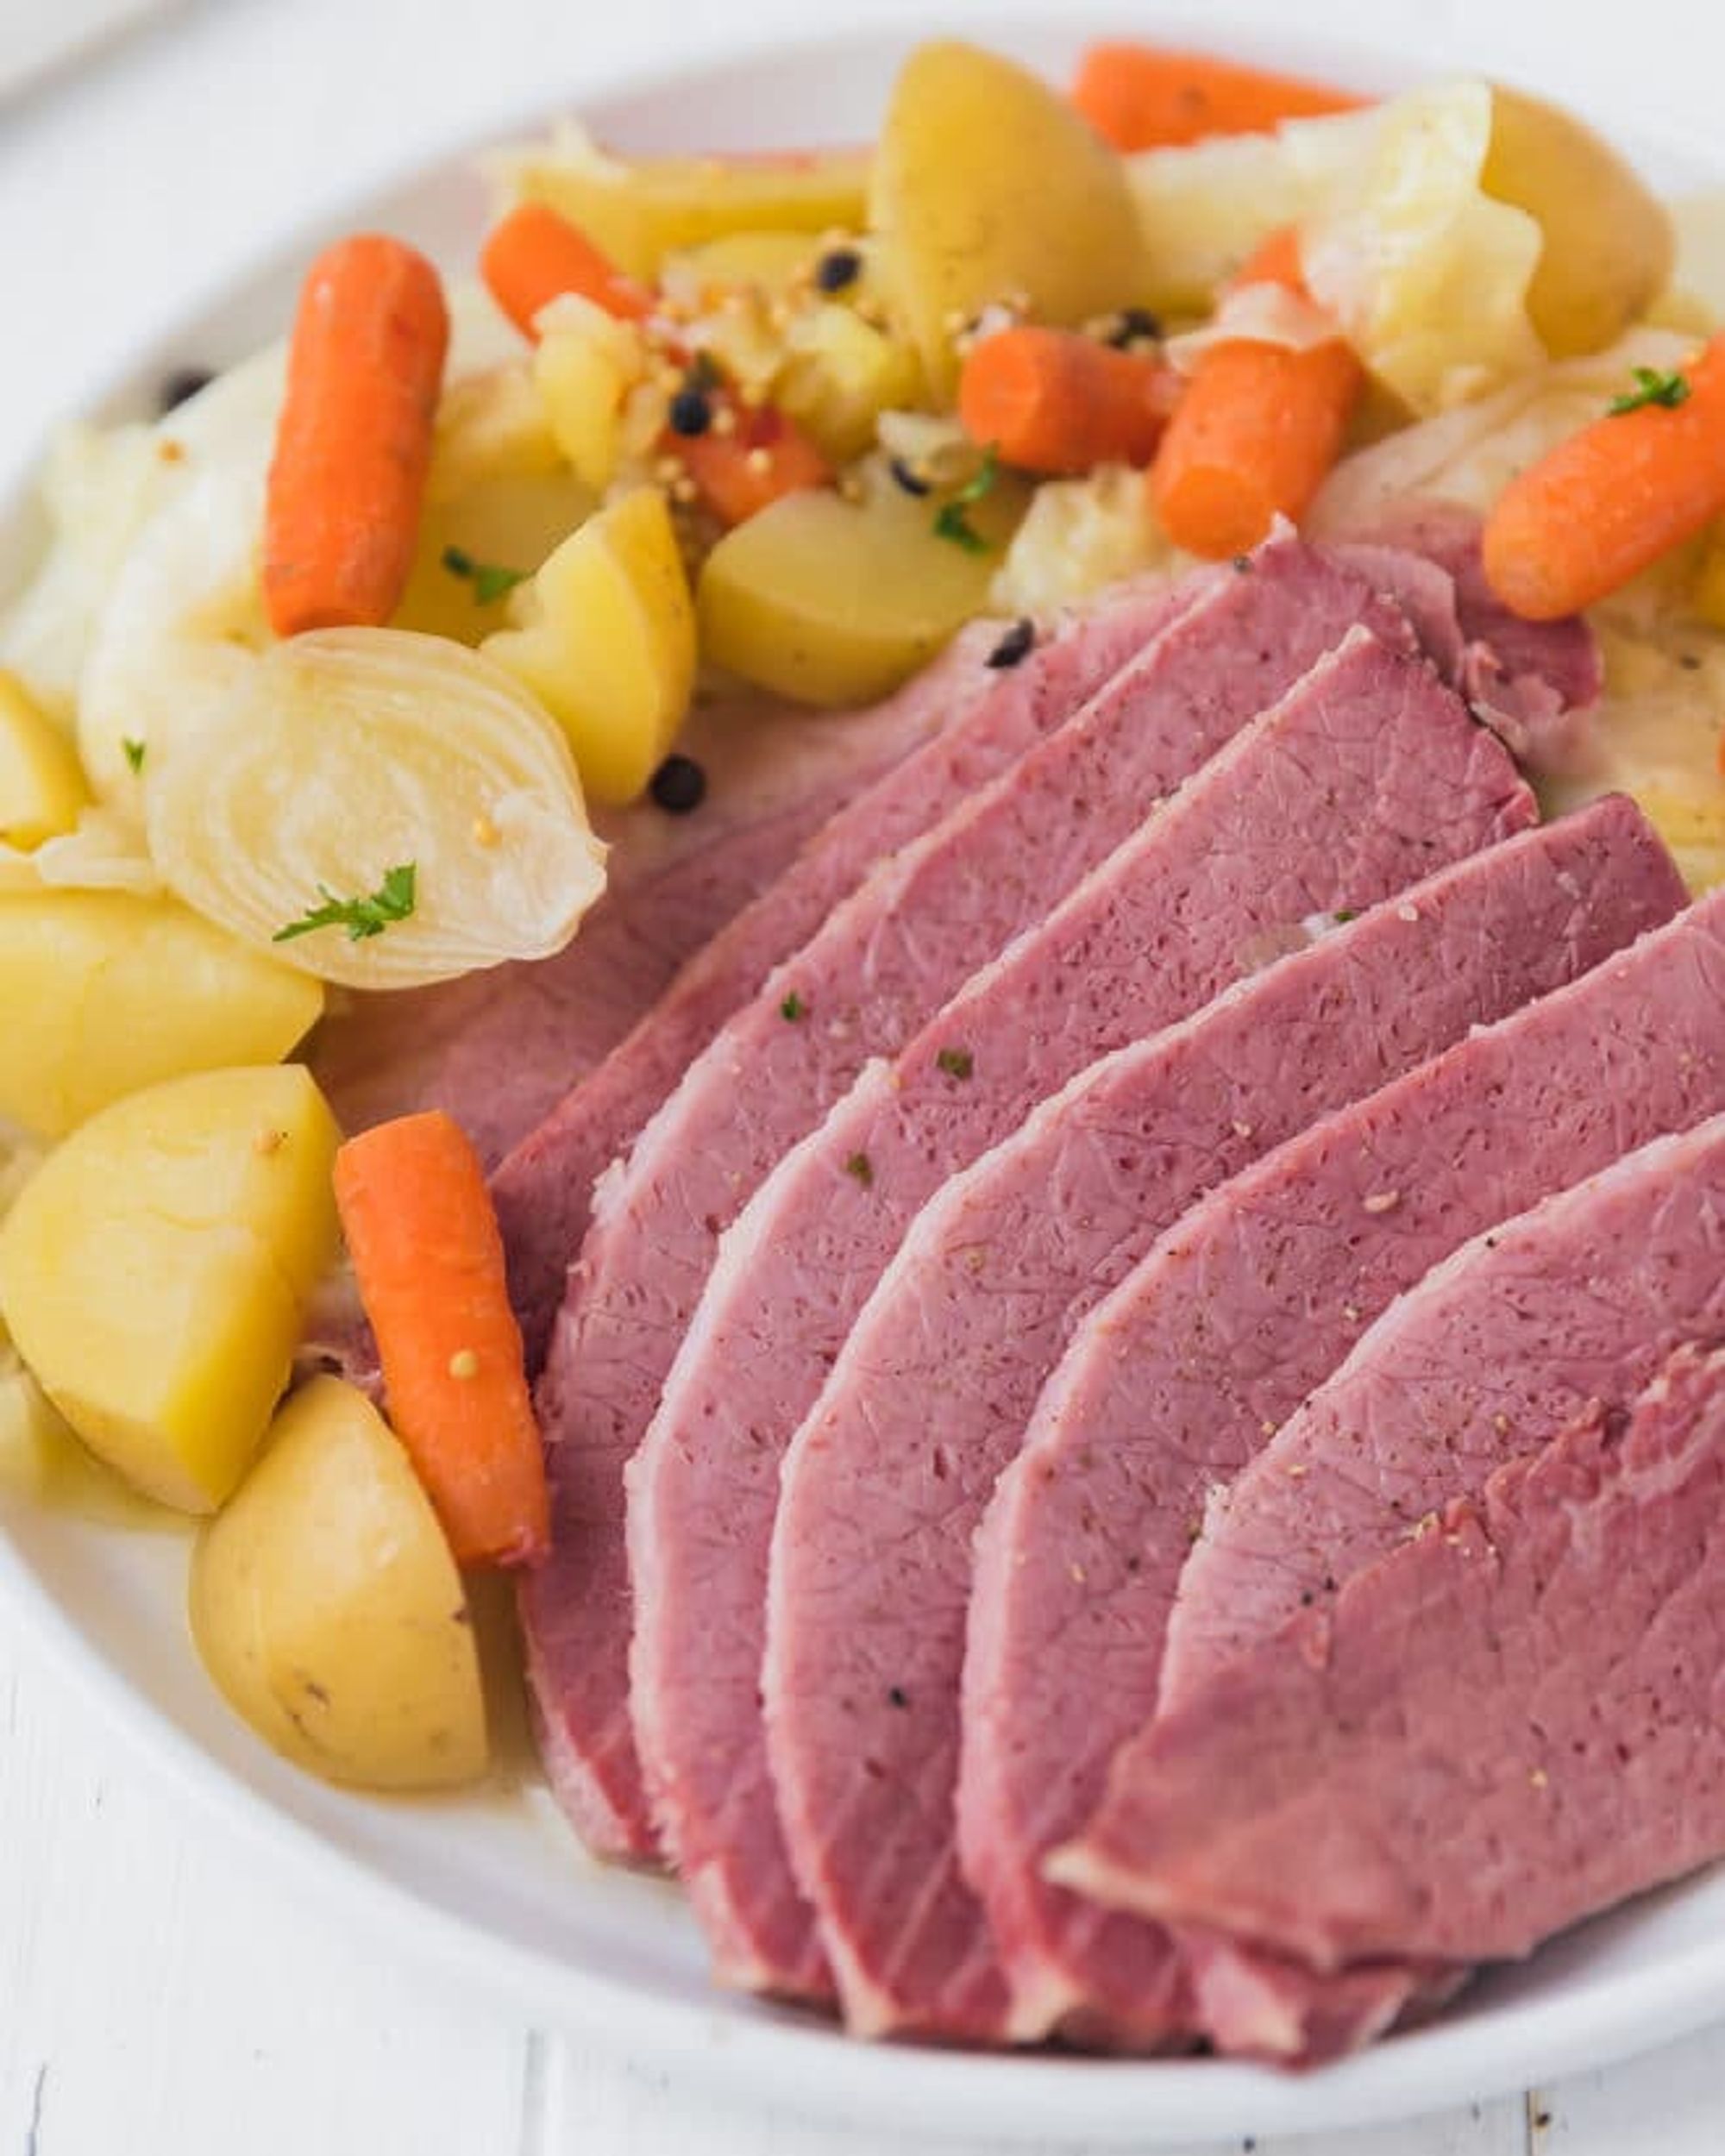 Corned Beef And Cabbage Recipe - Cooking LSL - My Recipe Magic